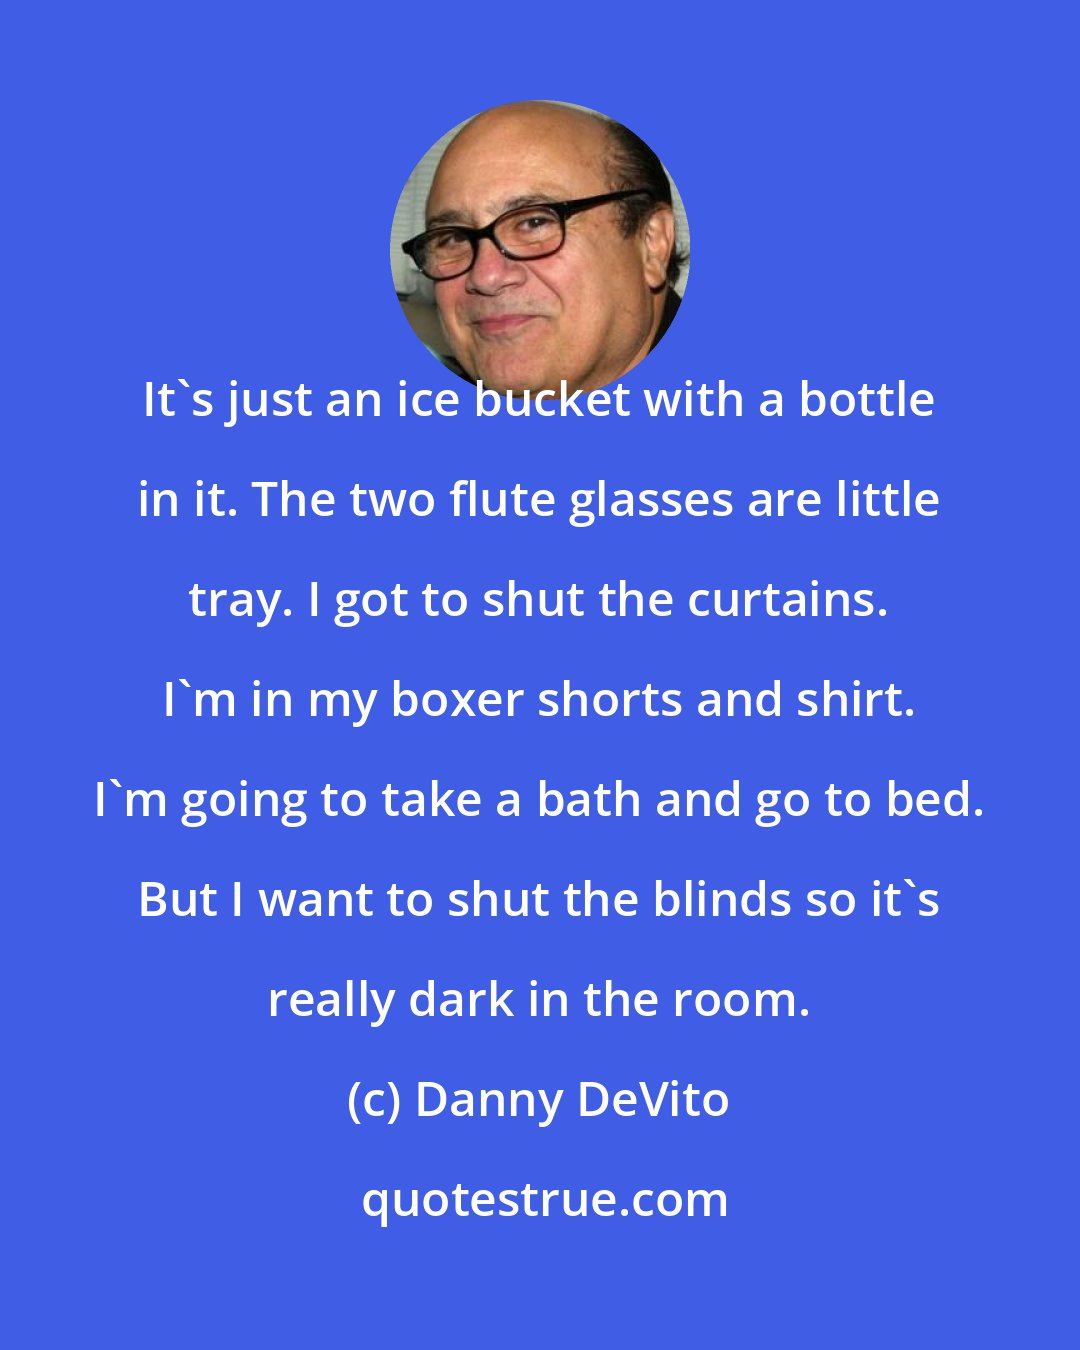 Danny DeVito: It's just an ice bucket with a bottle in it. The two flute glasses are little tray. I got to shut the curtains. I'm in my boxer shorts and shirt. I'm going to take a bath and go to bed. But I want to shut the blinds so it's really dark in the room.